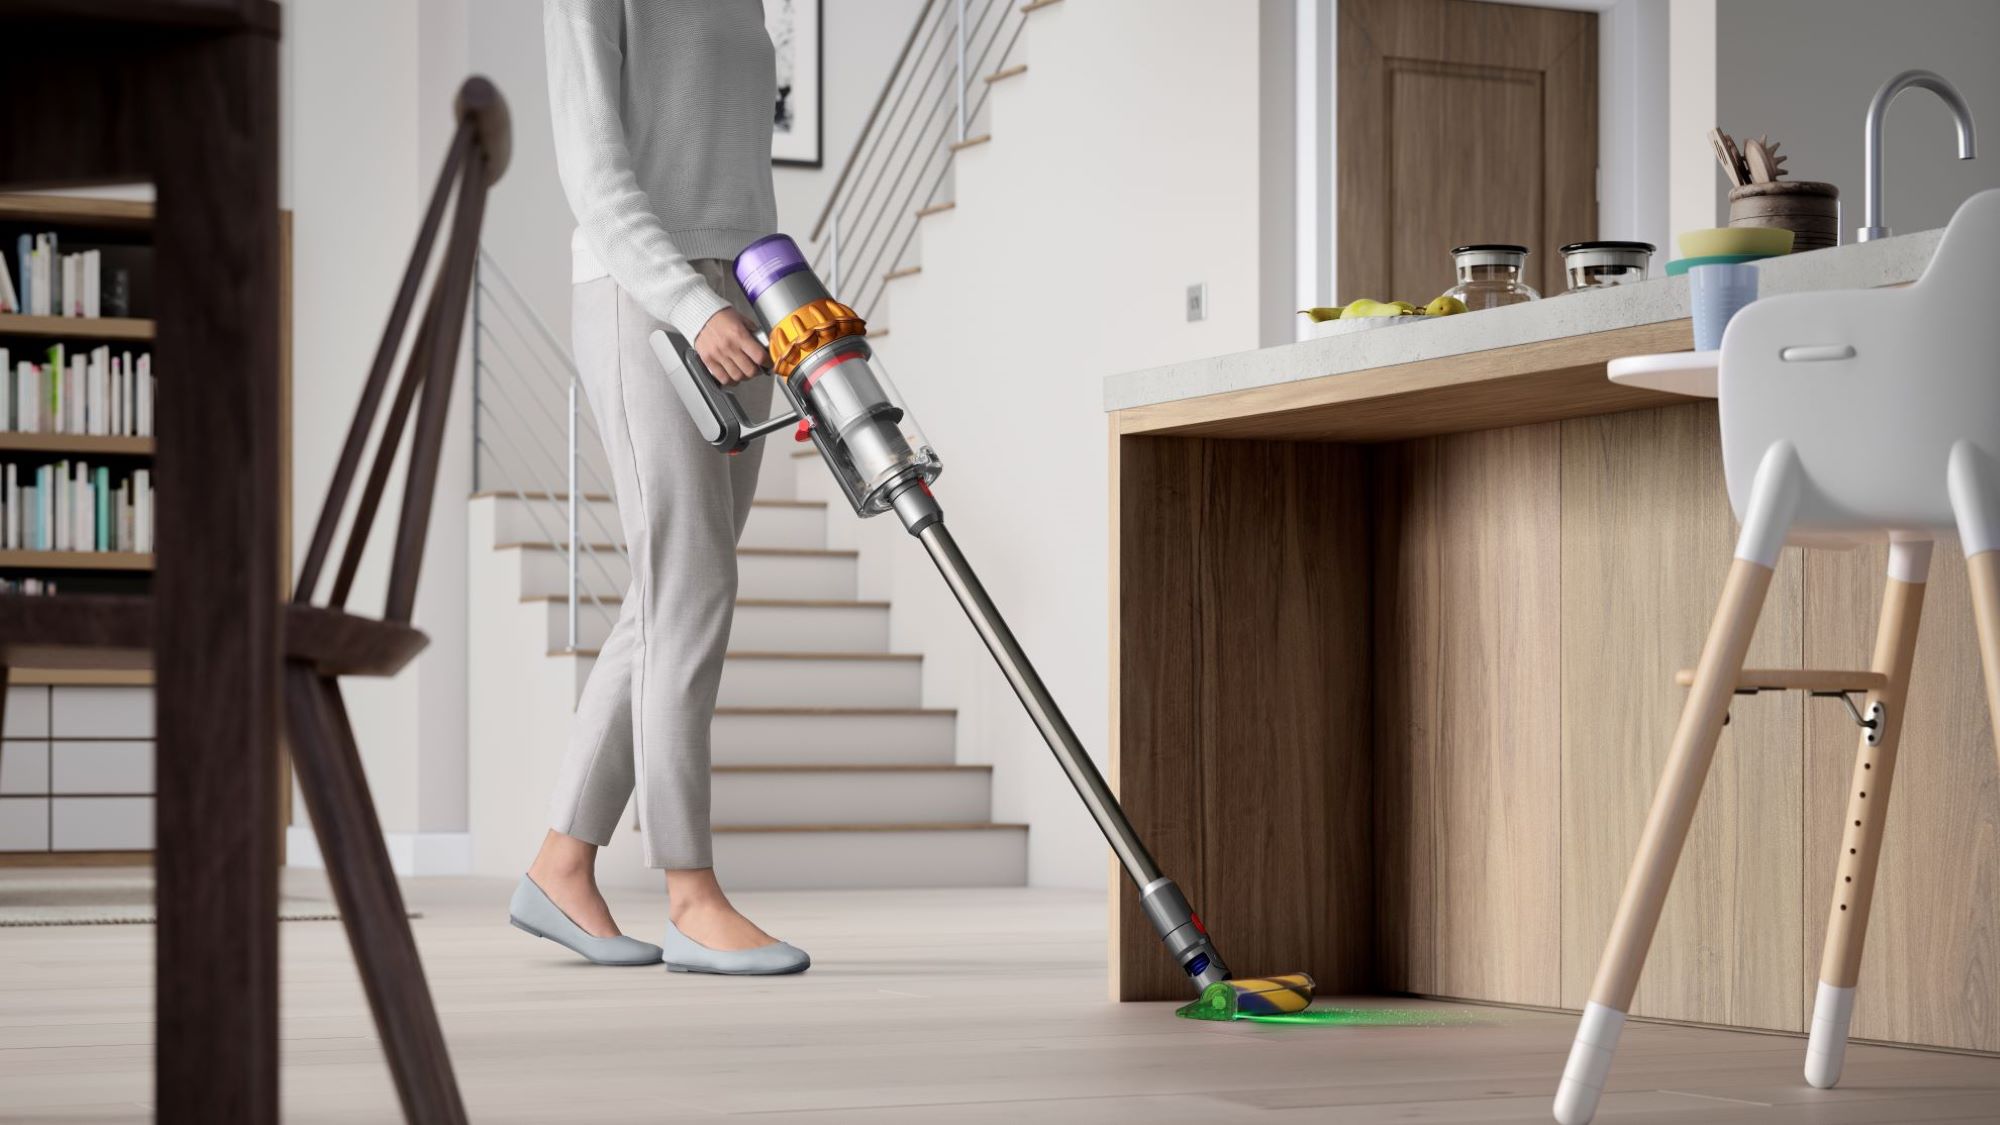 Dyson V15 Detect Absolute - Filter options